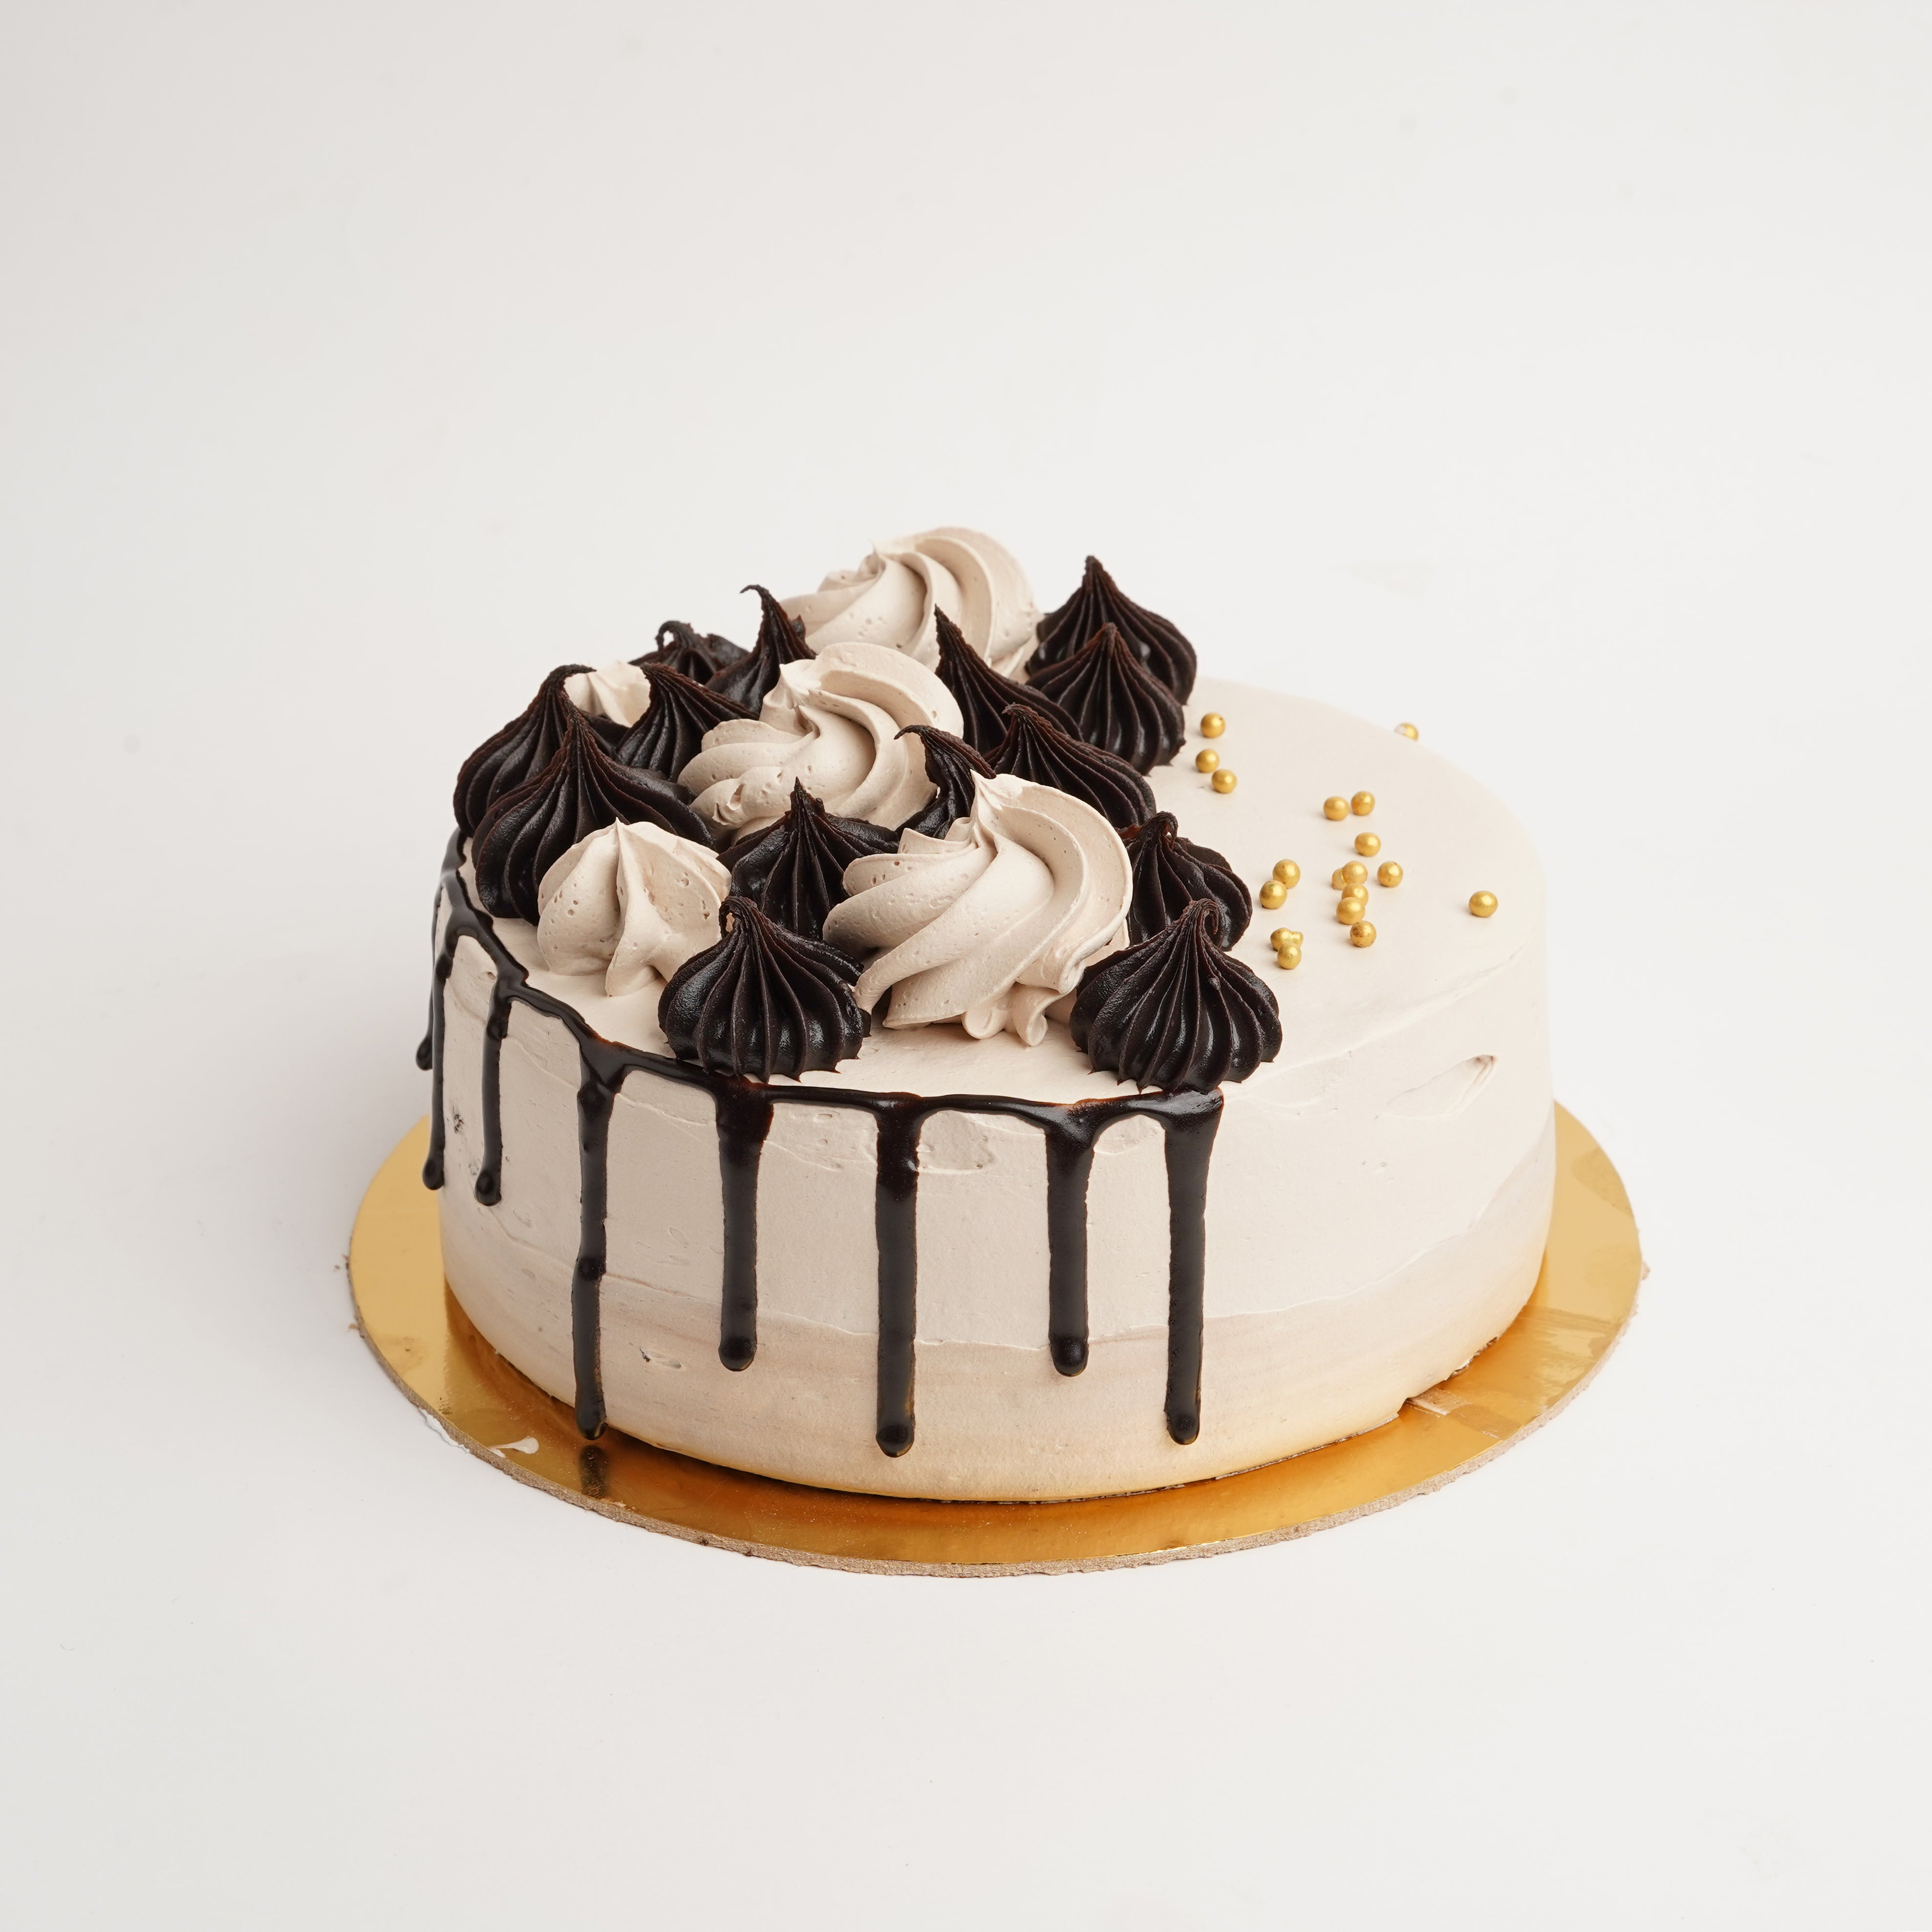 Silky smooth, decadent Belgian Chocolate Cake that will brighten your day!  | Delish Mama Cake Studio | Cake, Chocolate cake, Chocolate